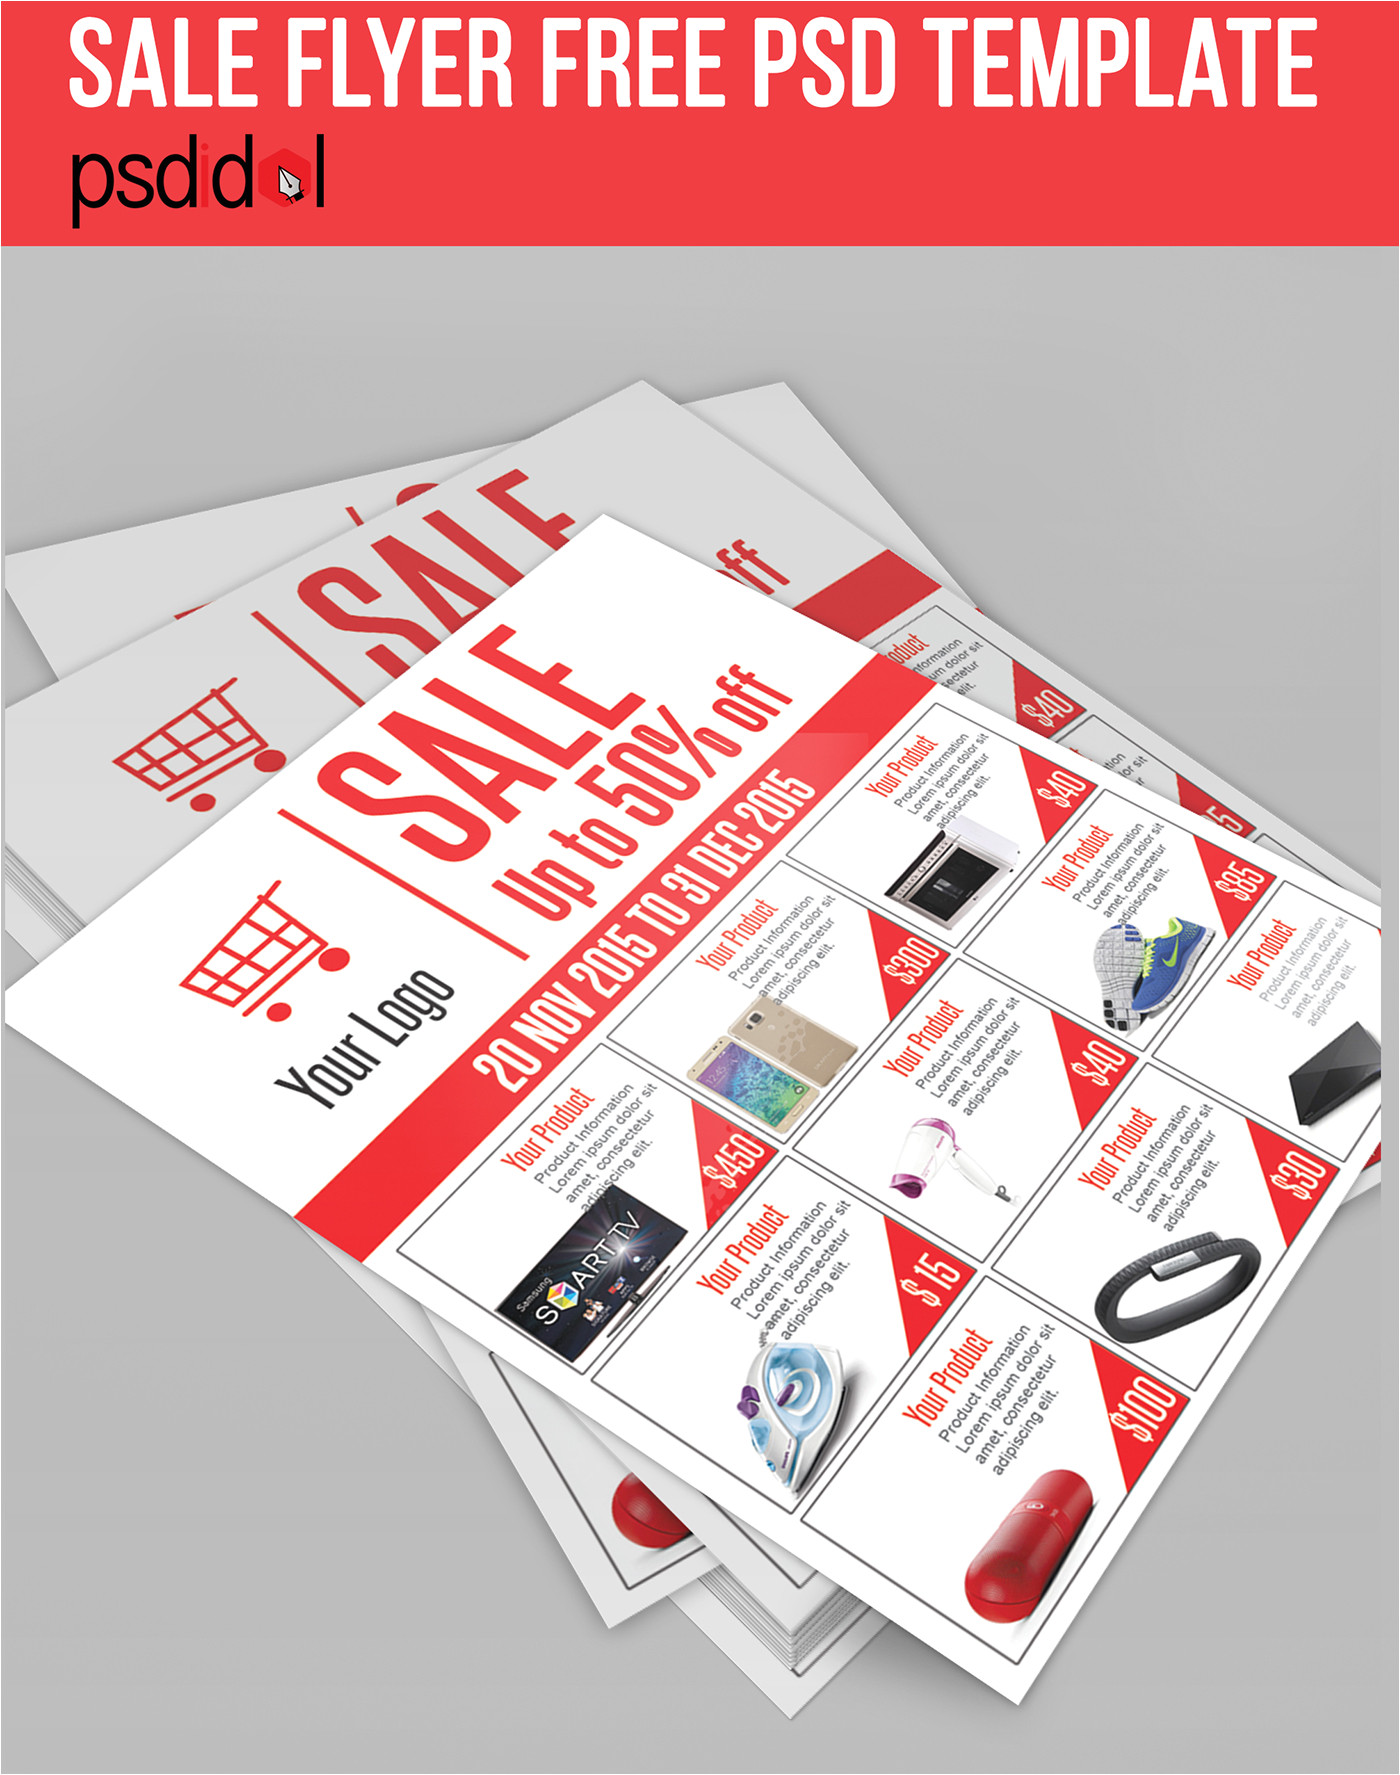 sale flyer free psd template download